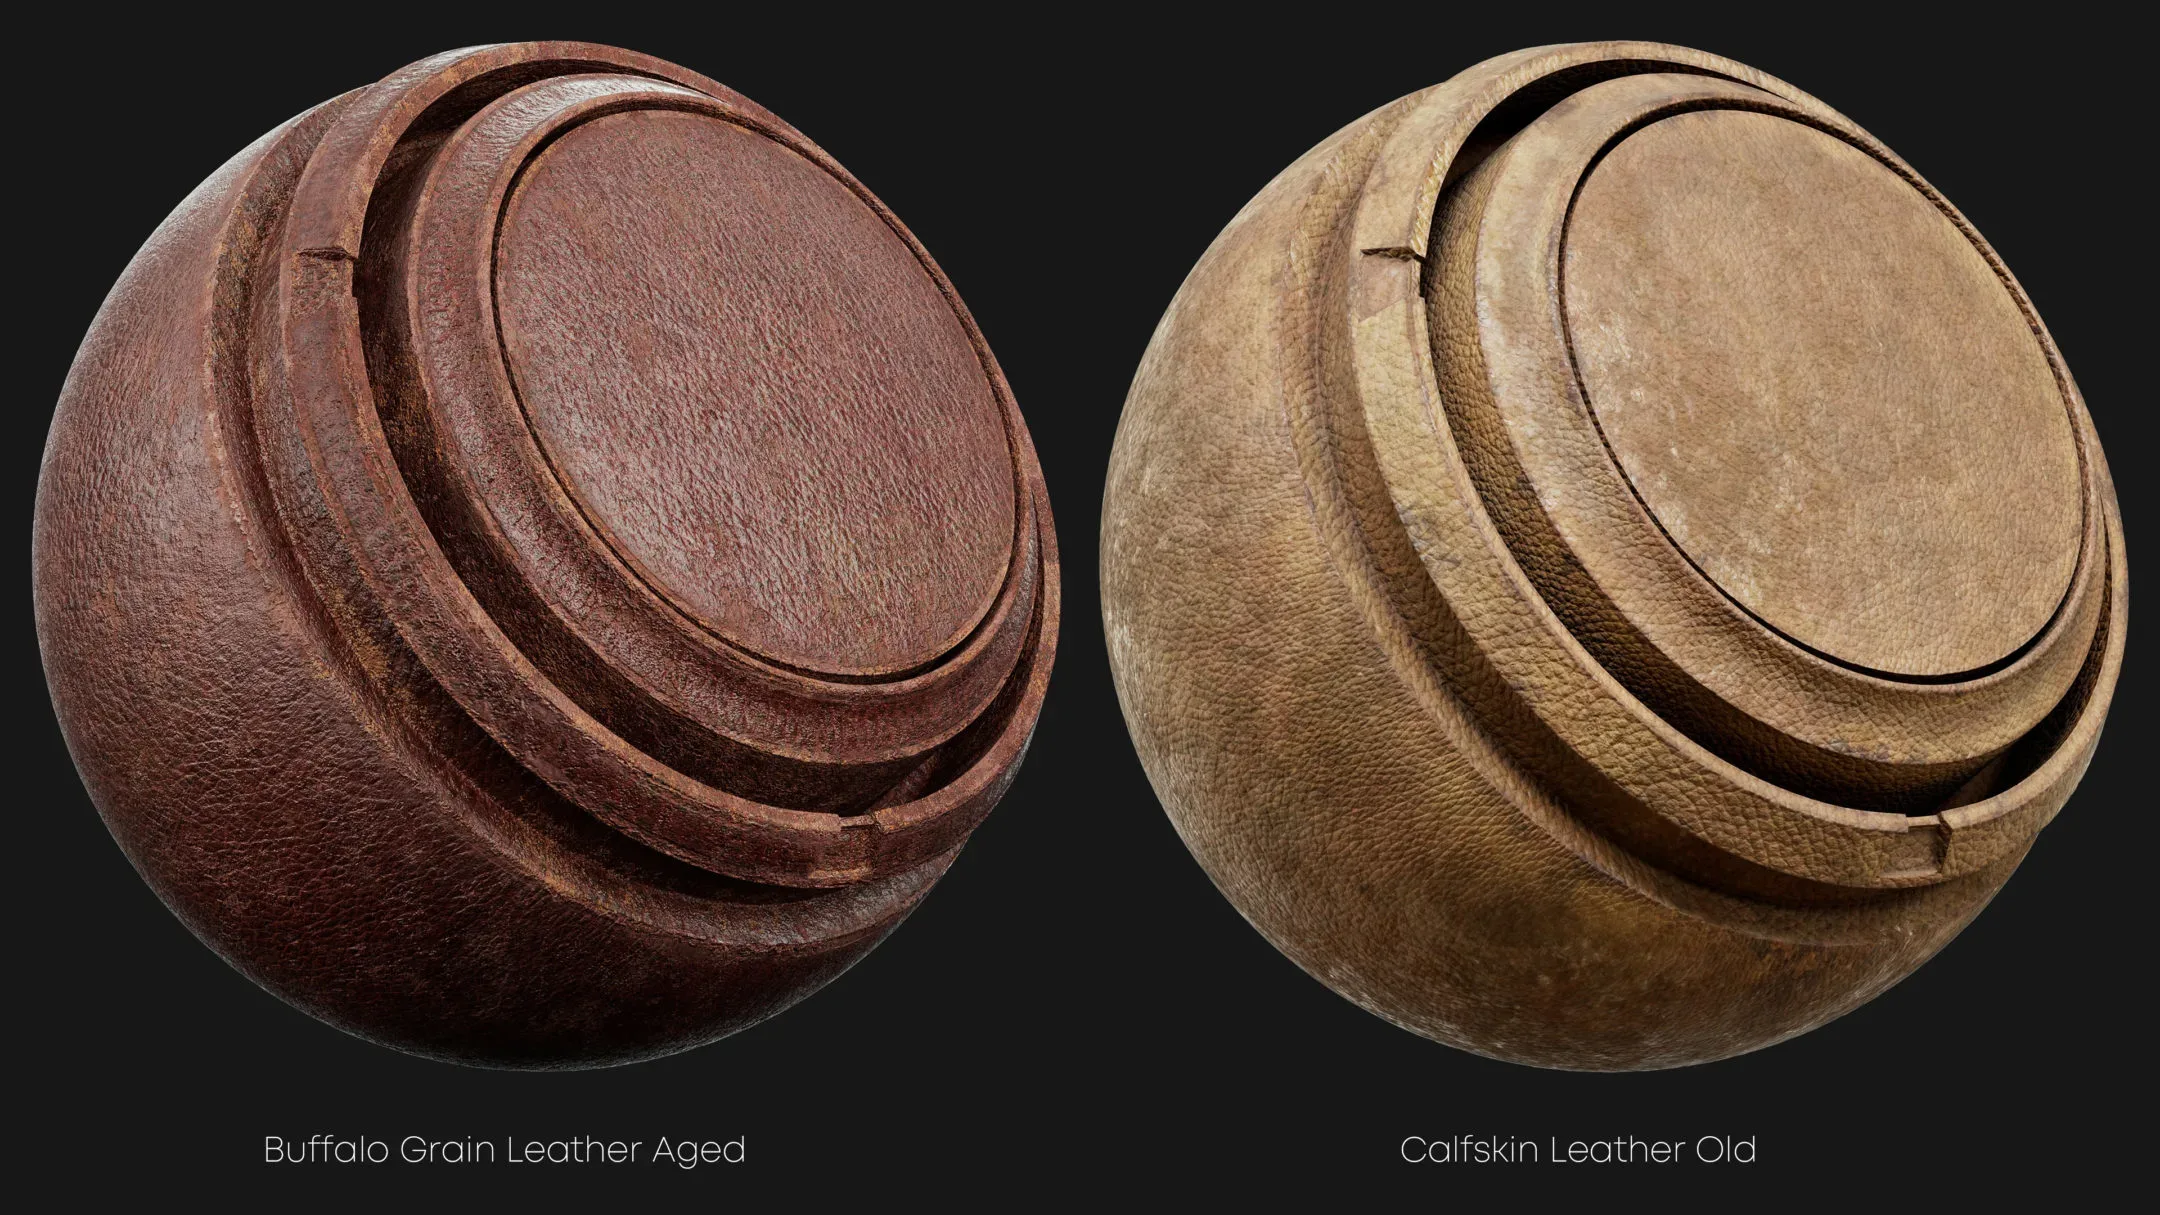 Leather Smart Materials for Substance painter